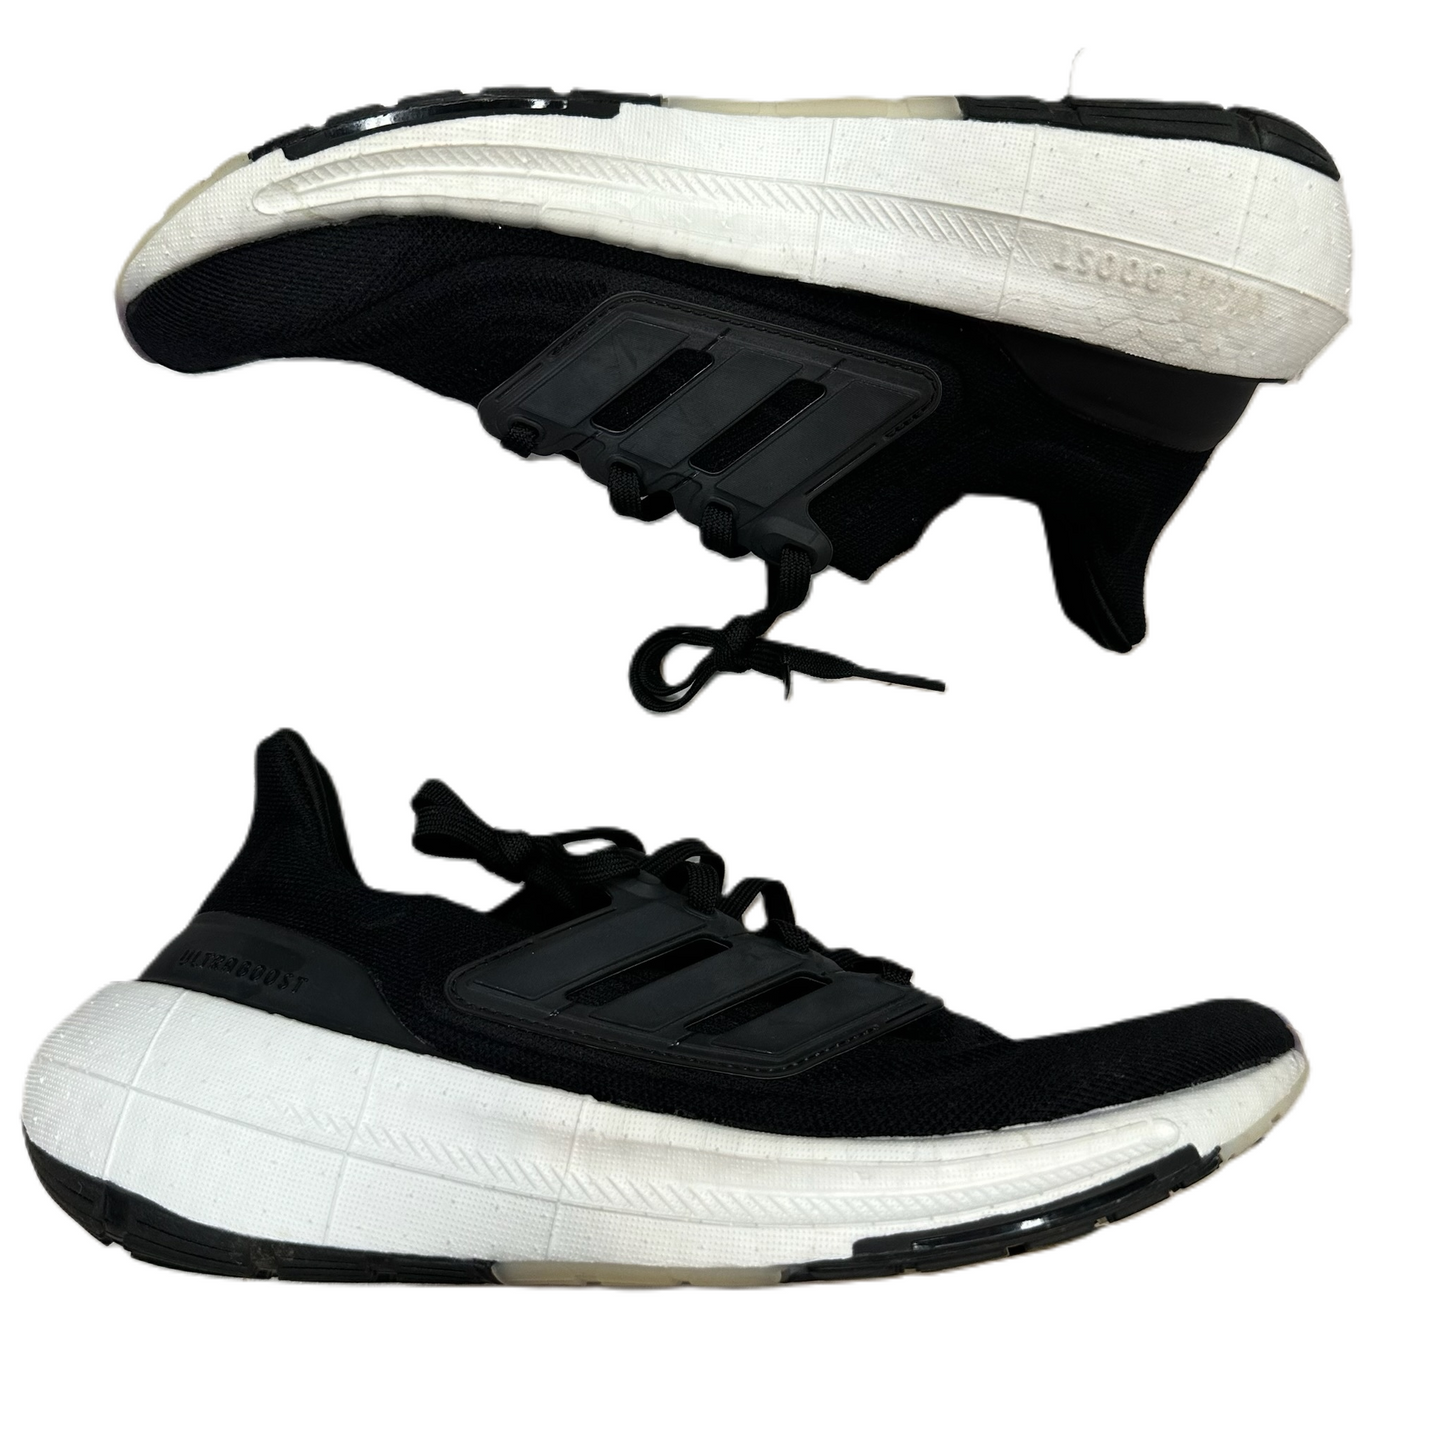 Black Shoes Athletic By Adidas, Size: 9